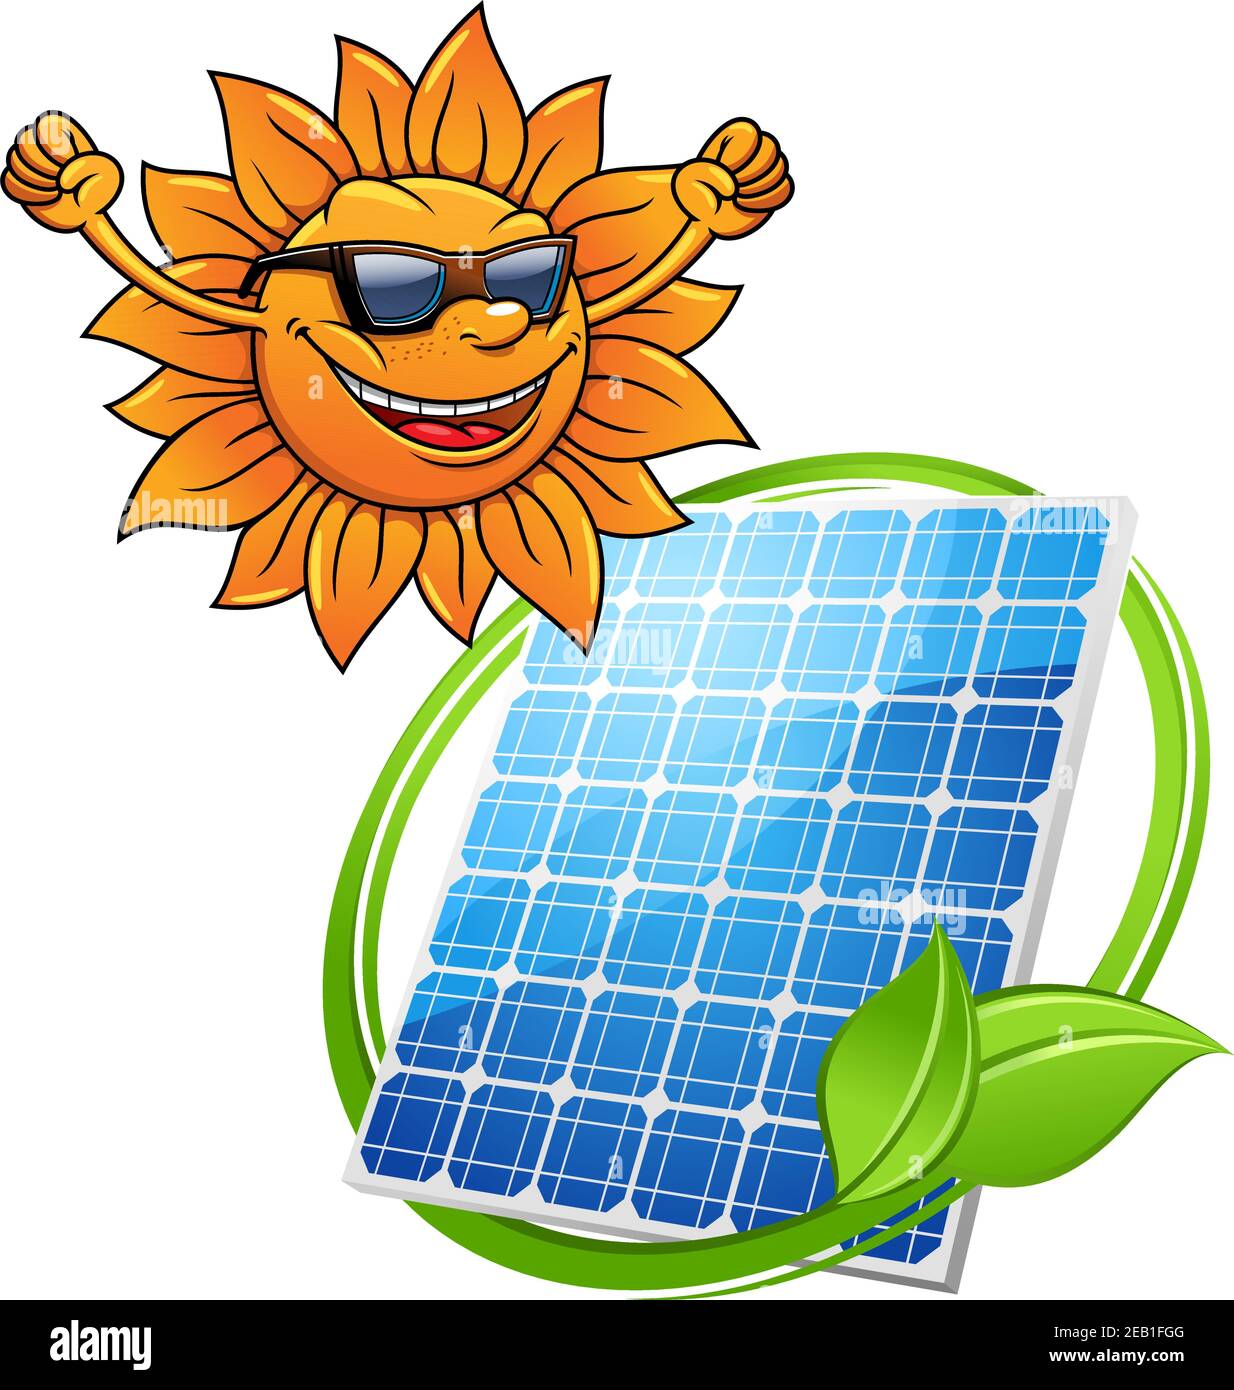 Cartoon sun with a happy smile wearing sunglasses with a photovoltaic cell with entwined greeen leaf for alternate eco-friendly solar energy Stock Vector